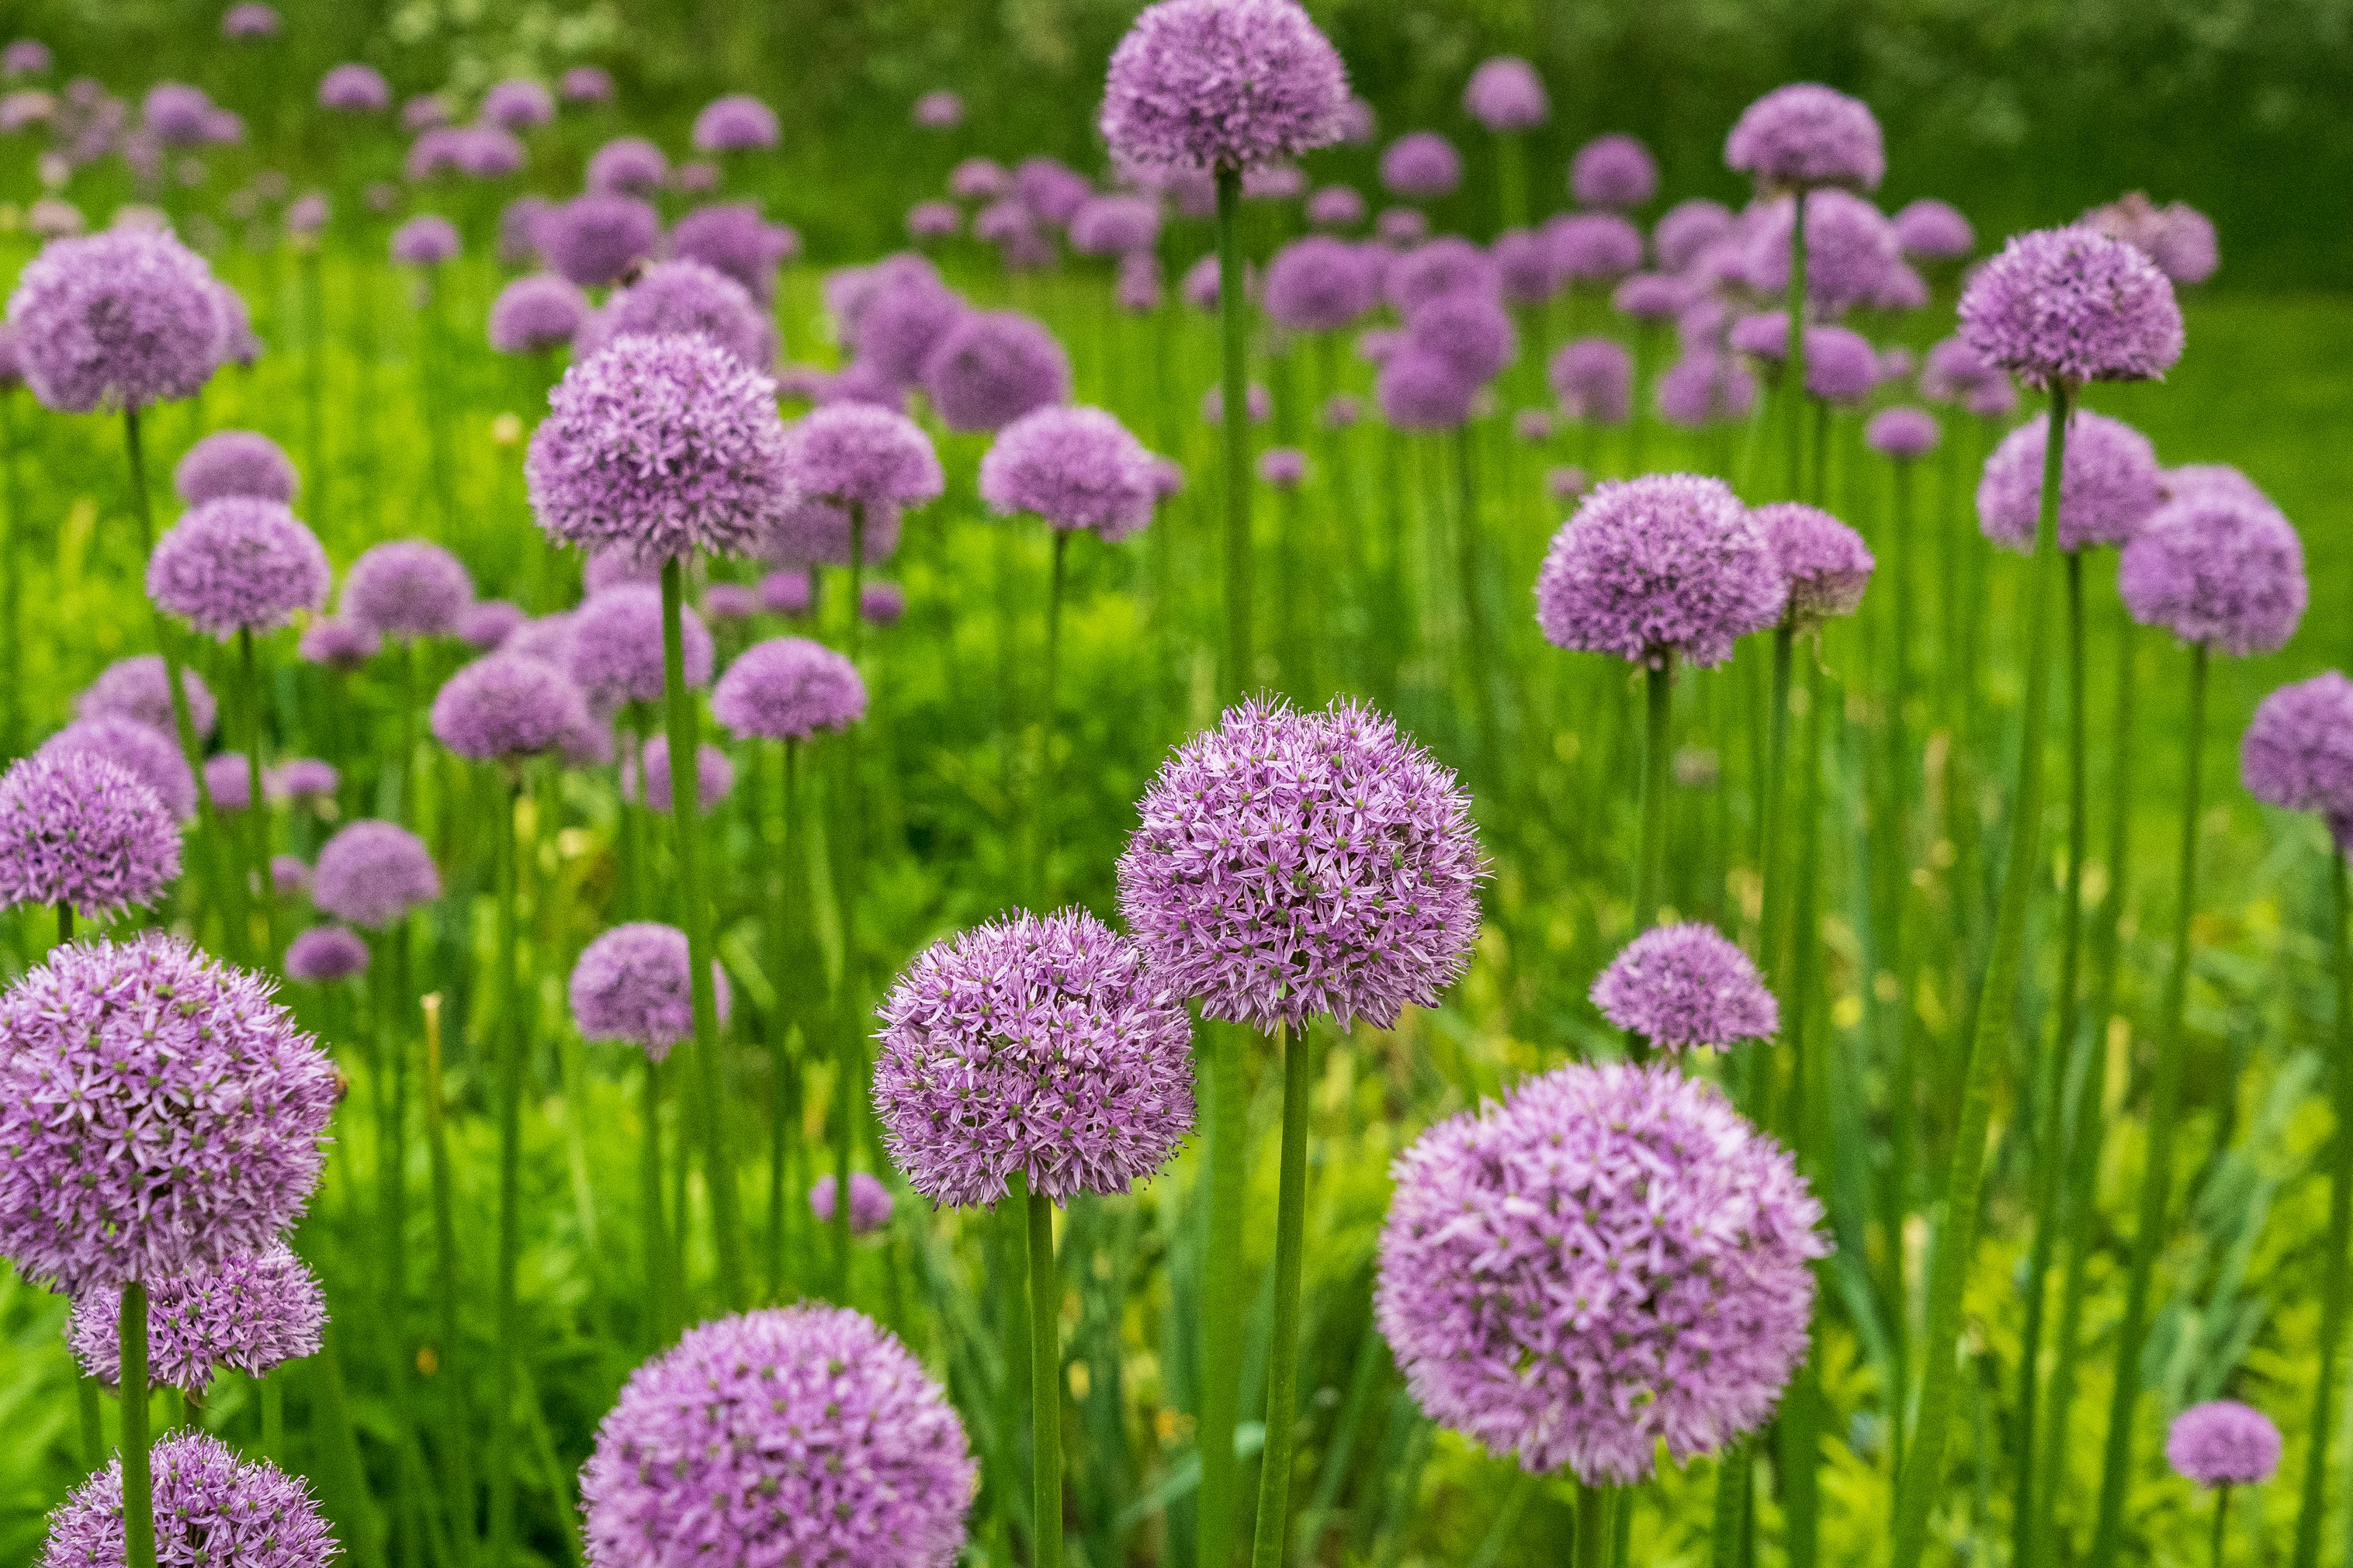 This will be the rough effect of the alliums next spring. Photo credit: Nick Fewings